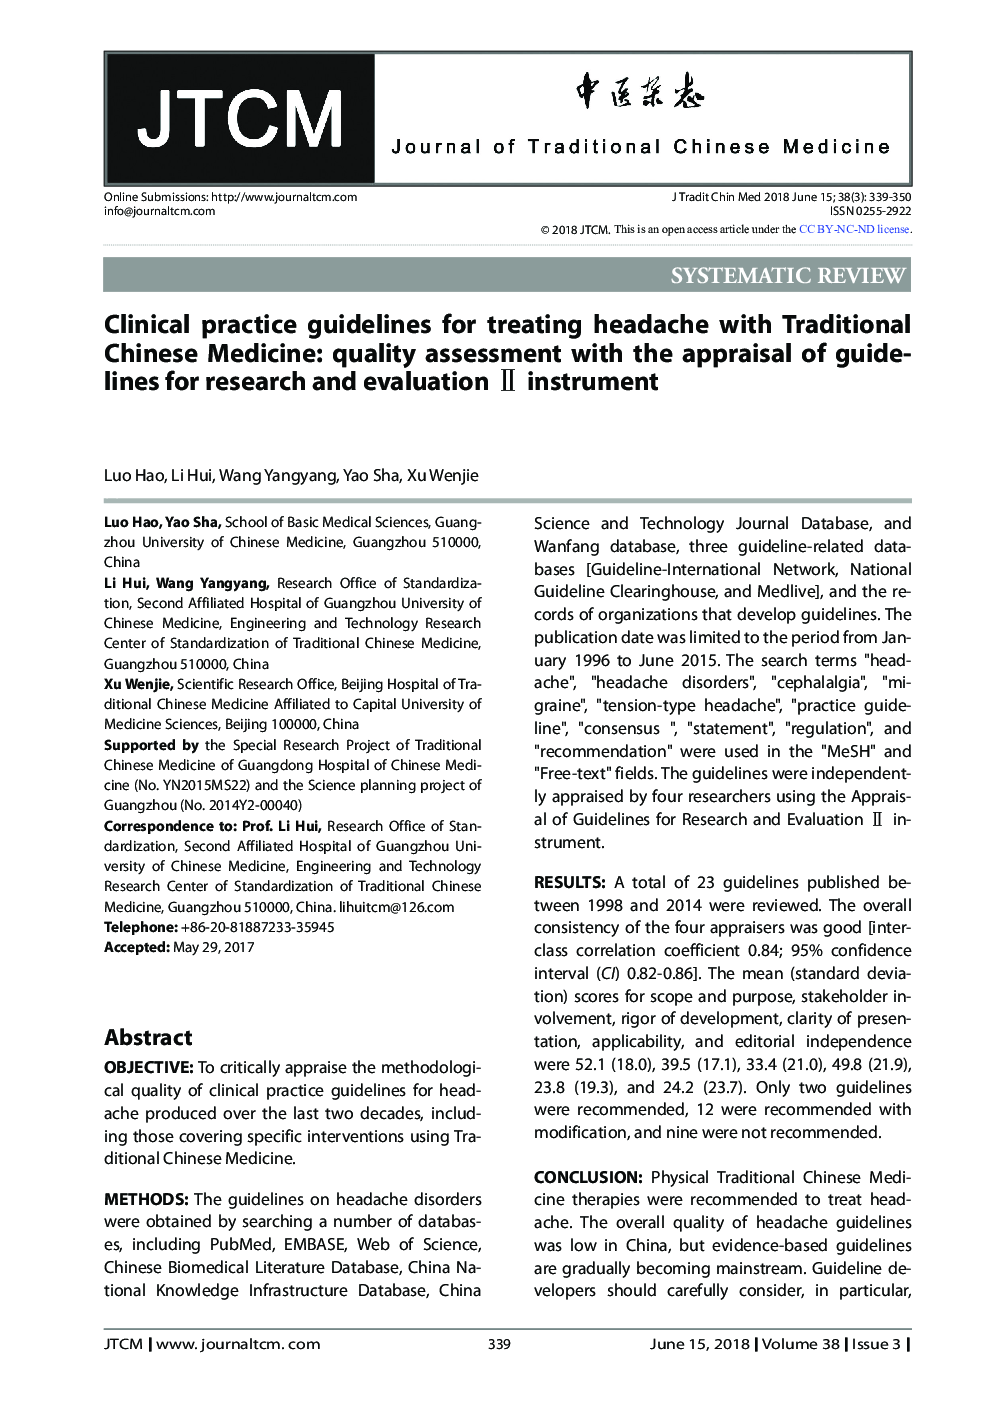 Clinical practice guidelines for treating headache with Traditional Chinese Medicine: quality assessment with the appraisal of guidelines for research and evaluation II instrument